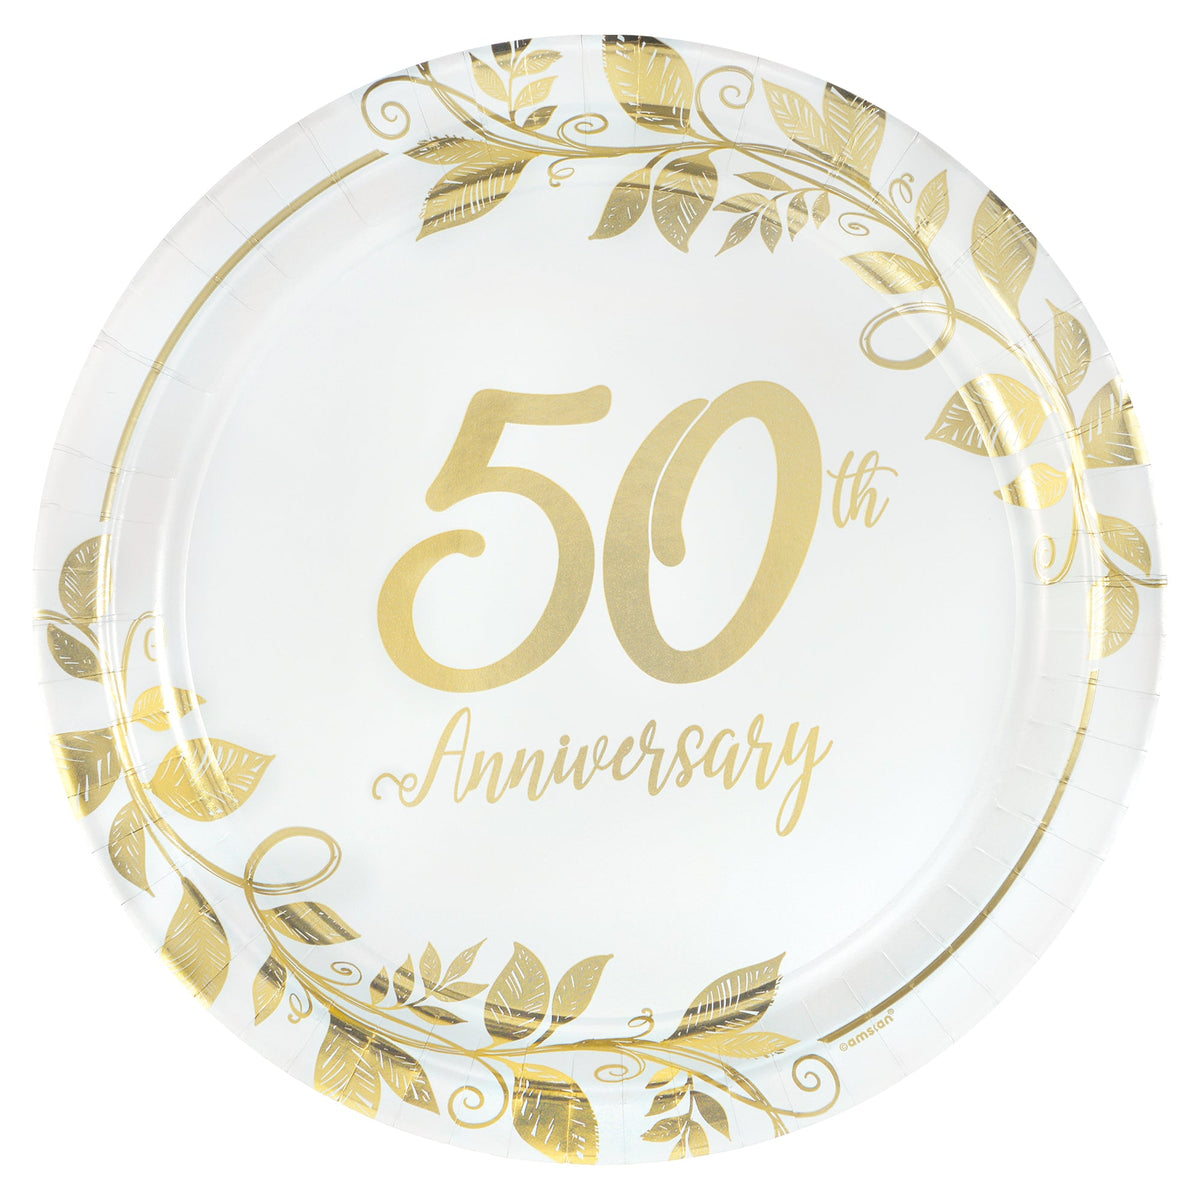 Happy 50th Anniversary 7" Round Metallic Plates Package of 8